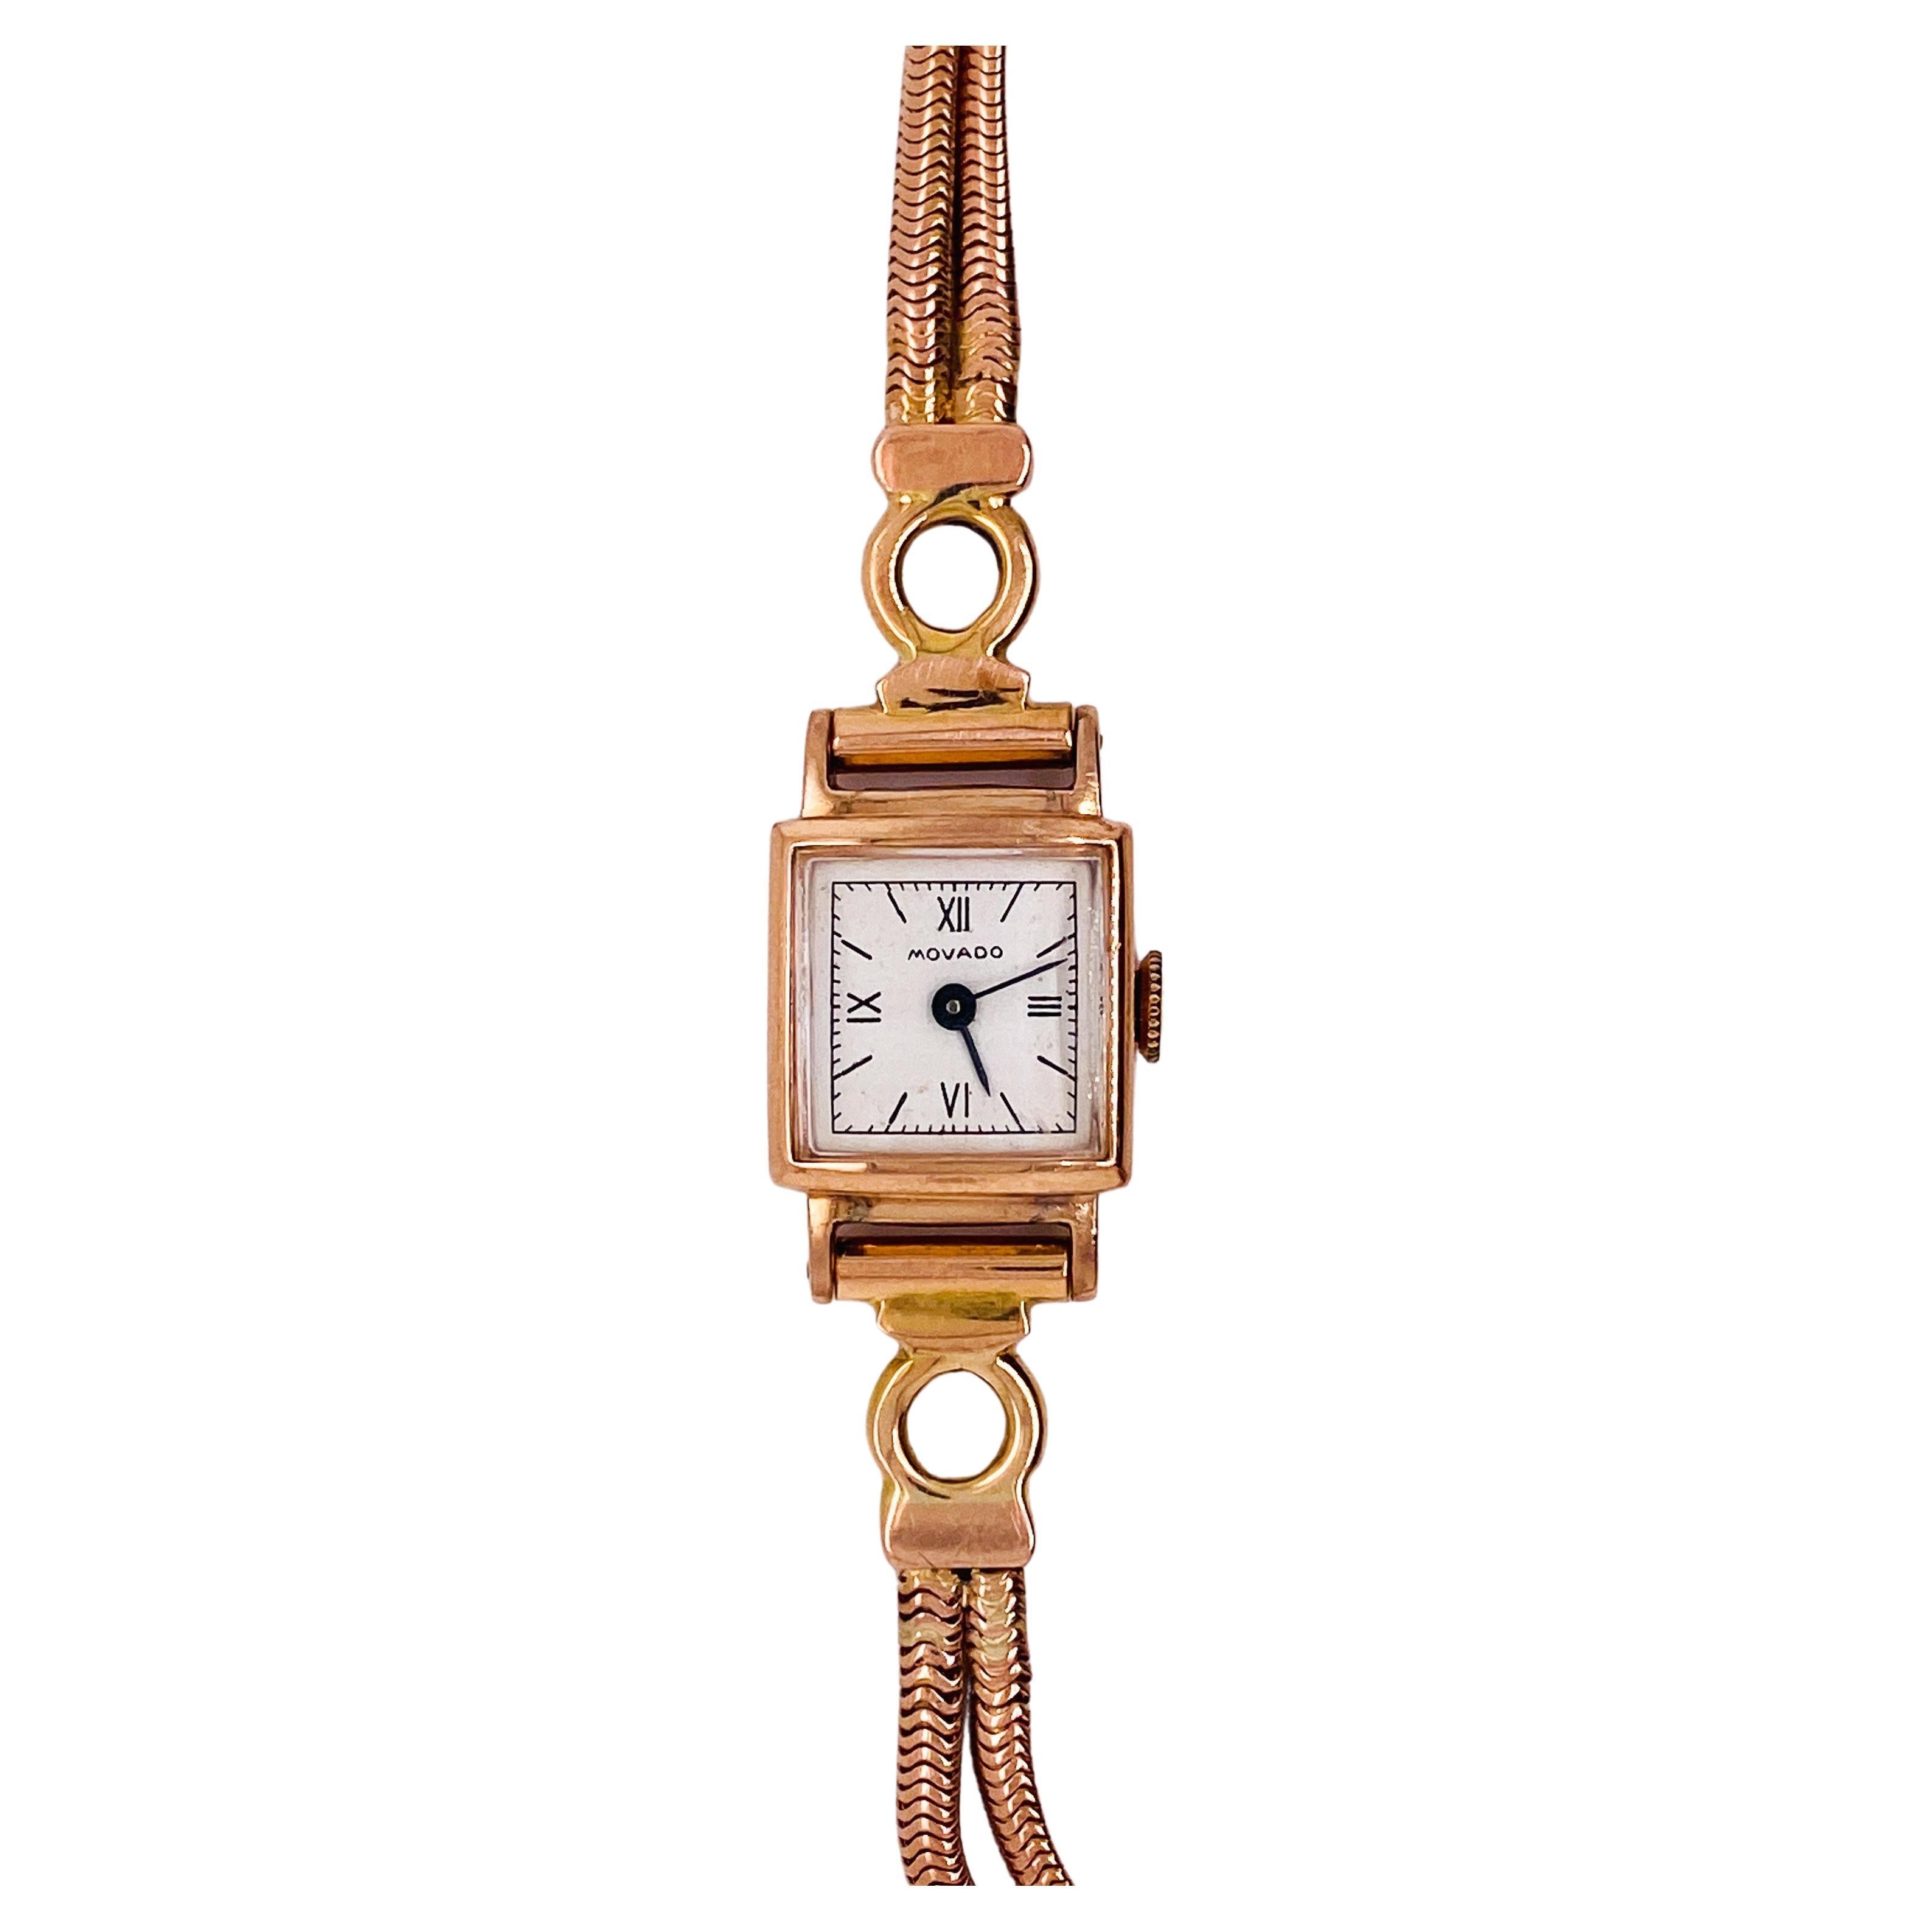 Retro Movado Watch in 14k Rose Gold circa 1954 Newly Serviced For Sale